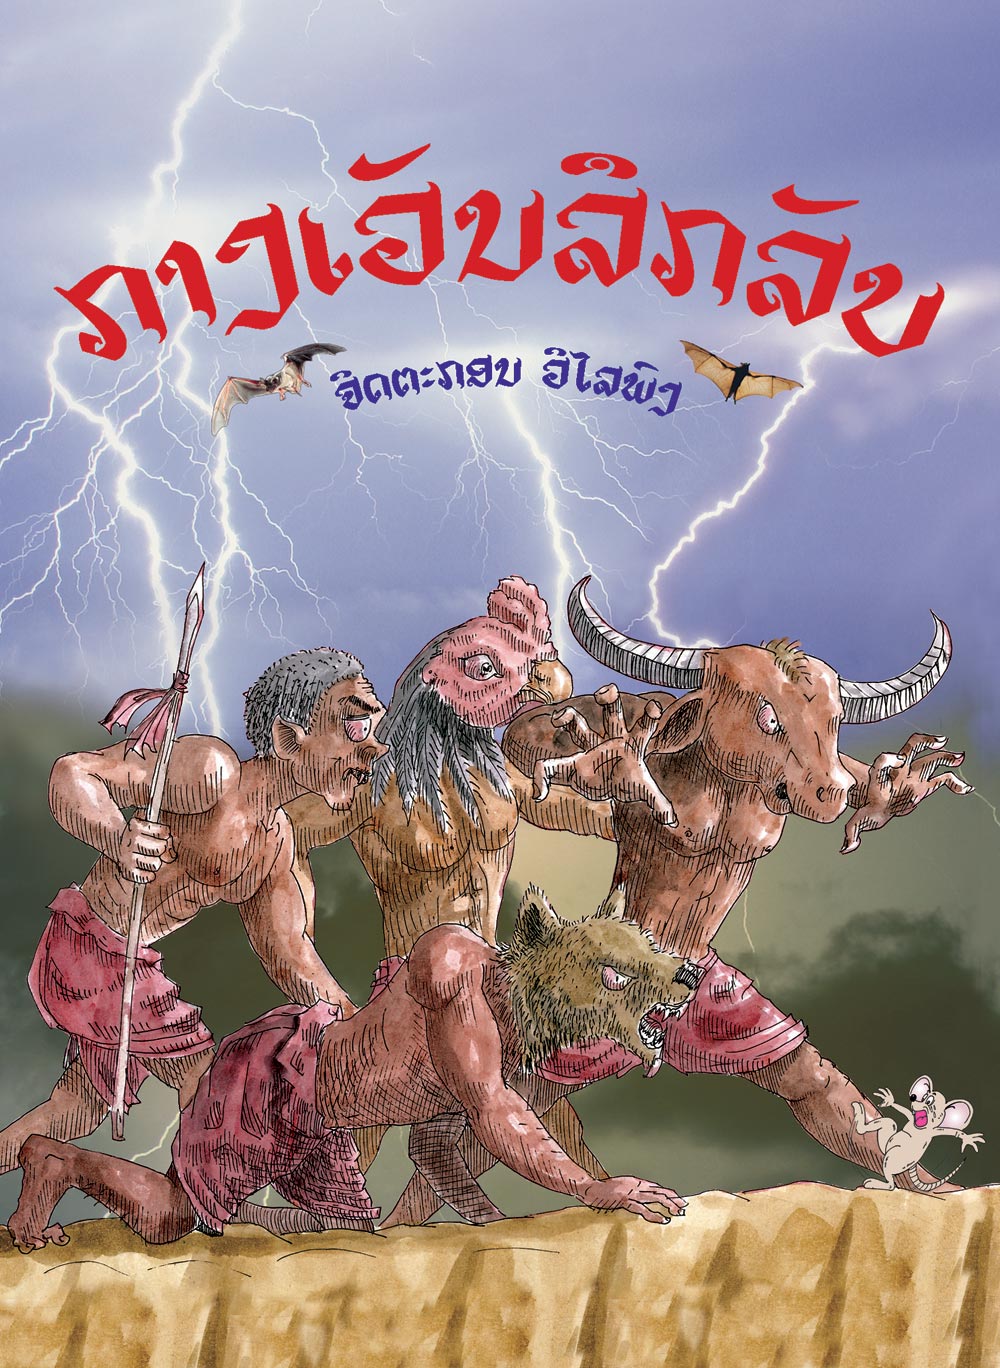 A Fantastic and Frightening Place large book cover, published in Lao language